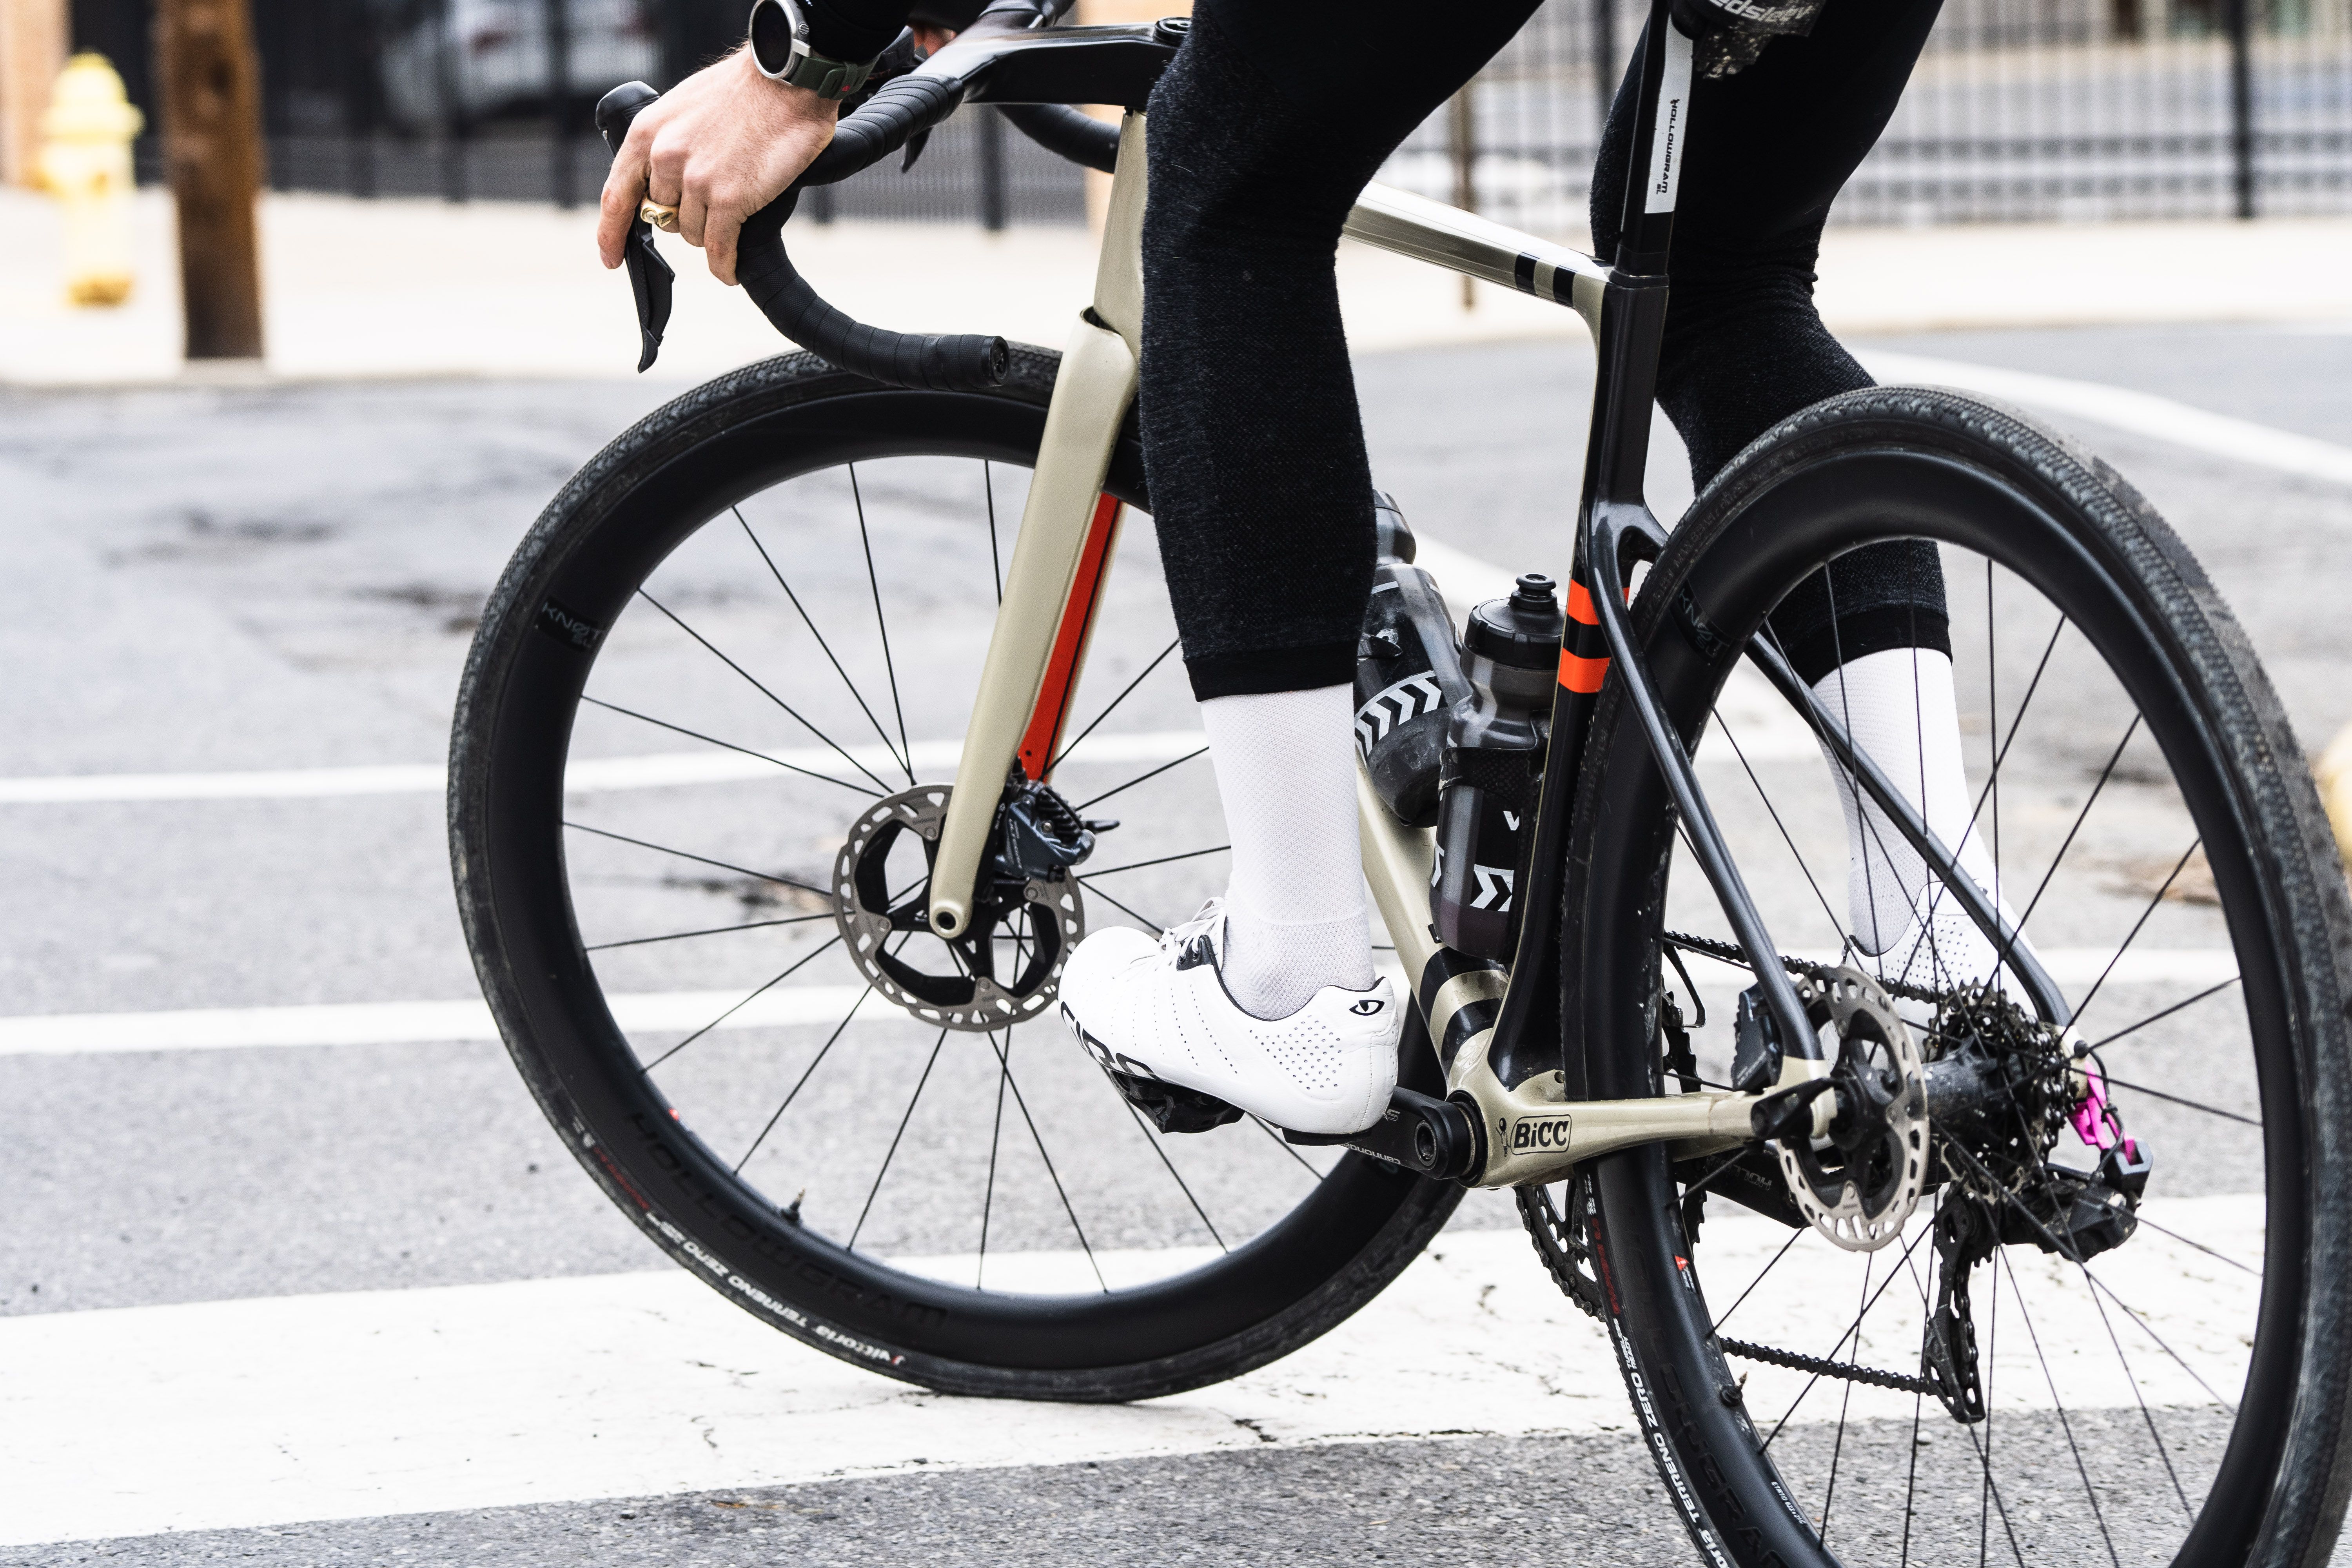 Learn How to Track Stand on a Bike With These Pro Tips